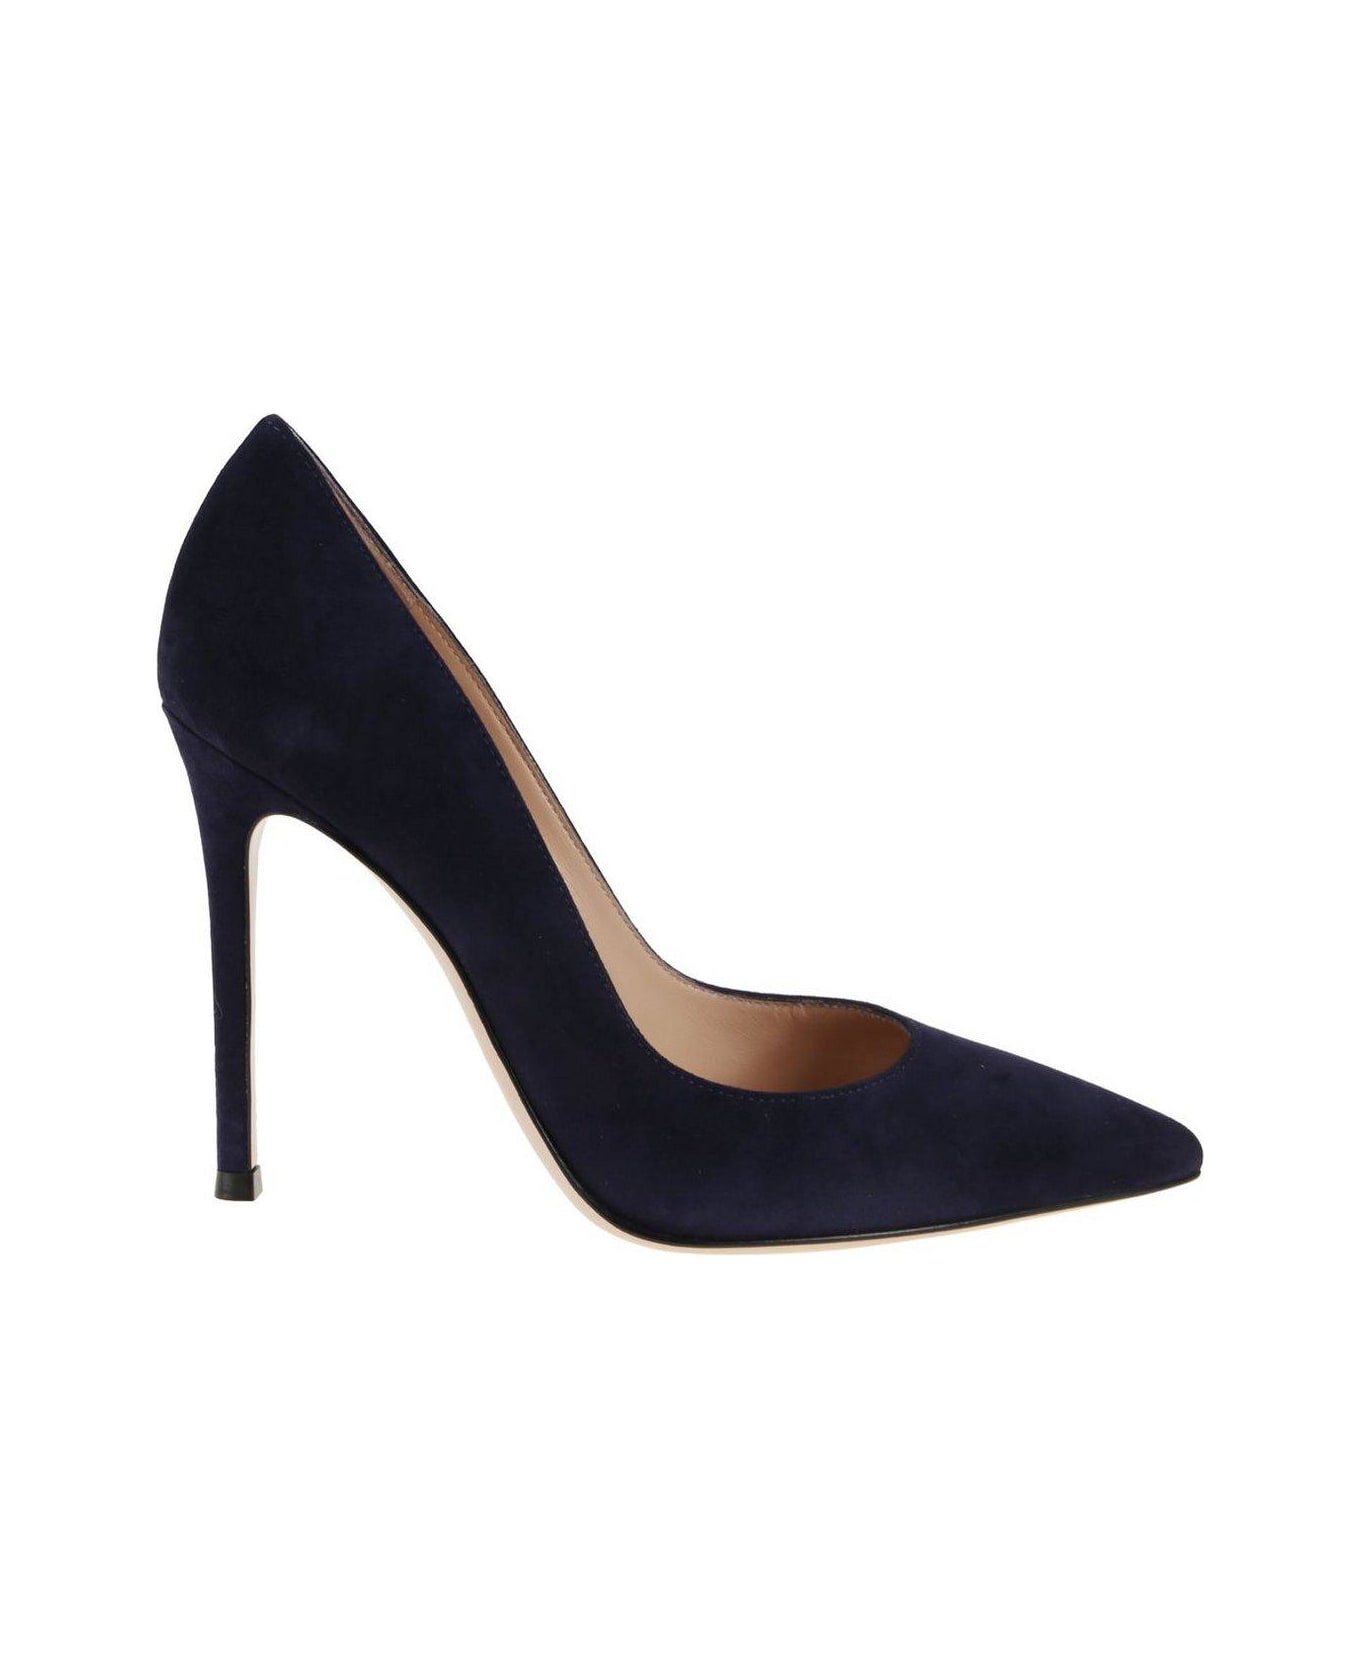 Gianvito Rossi Pointed Toe Pumps - Blue